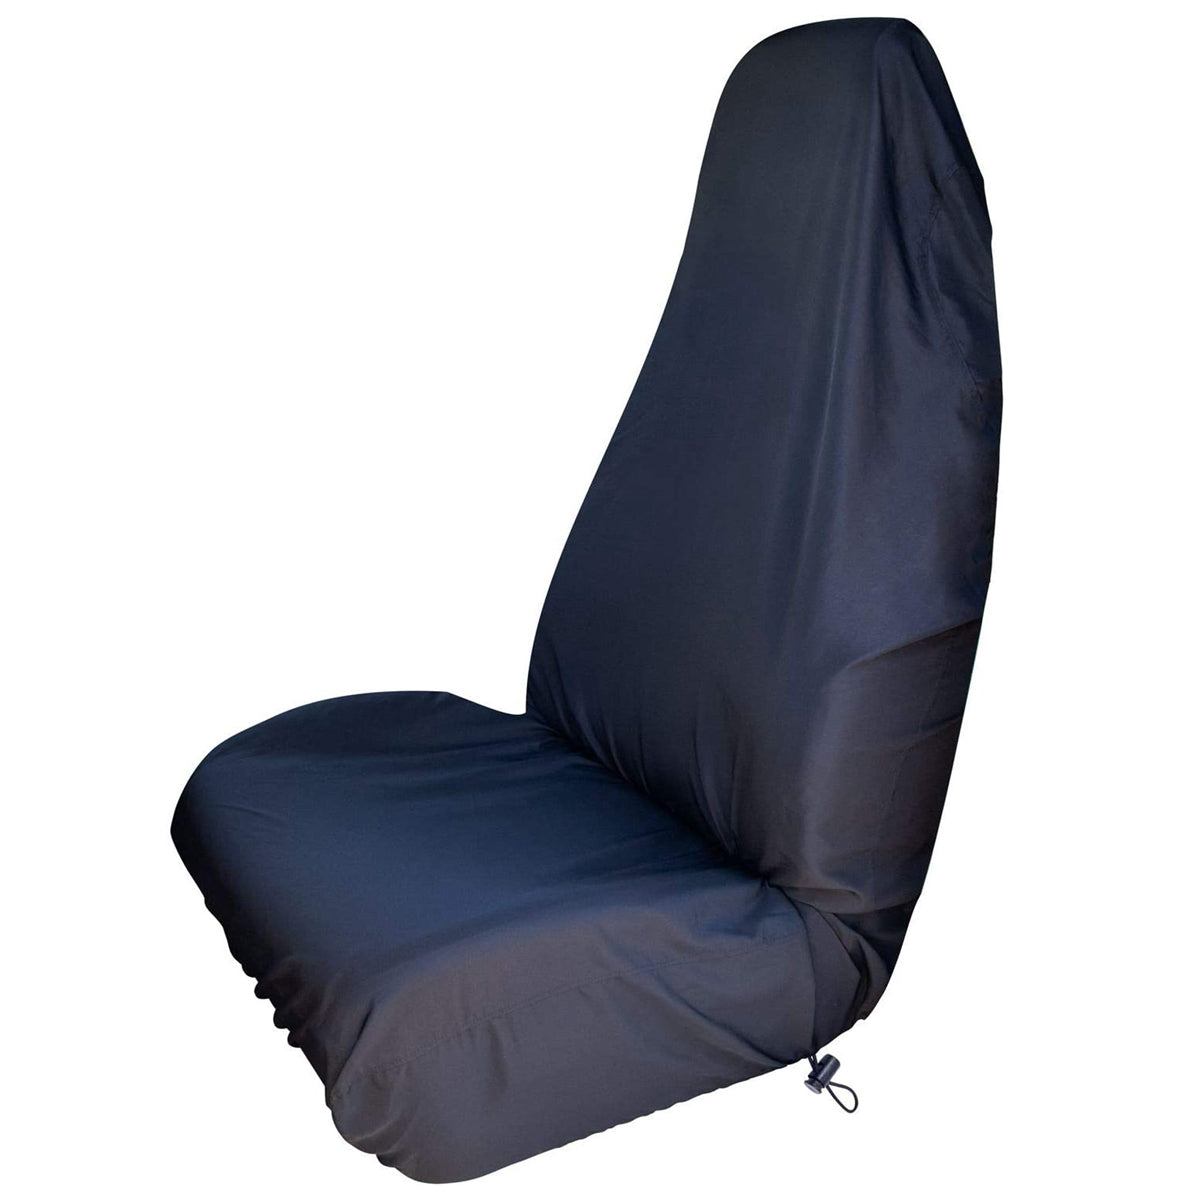 Covermama Grab N' Go Seat Cover - Universal Fit, Non-Stop Protection